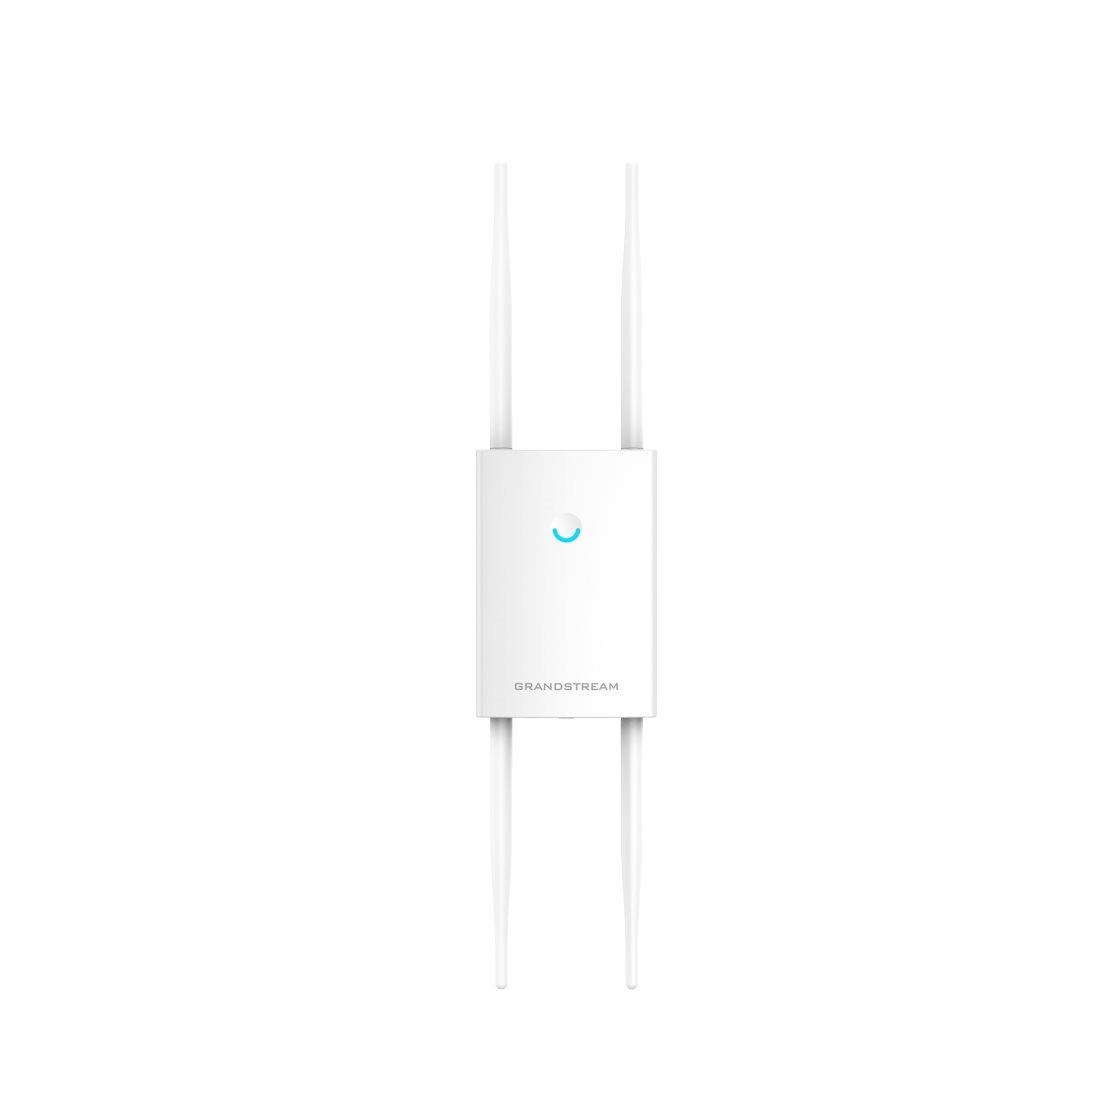   Point d'accs WiFi   Point d'accs Wifi ext. ac PoE 2,33Gbps GWN7630LR